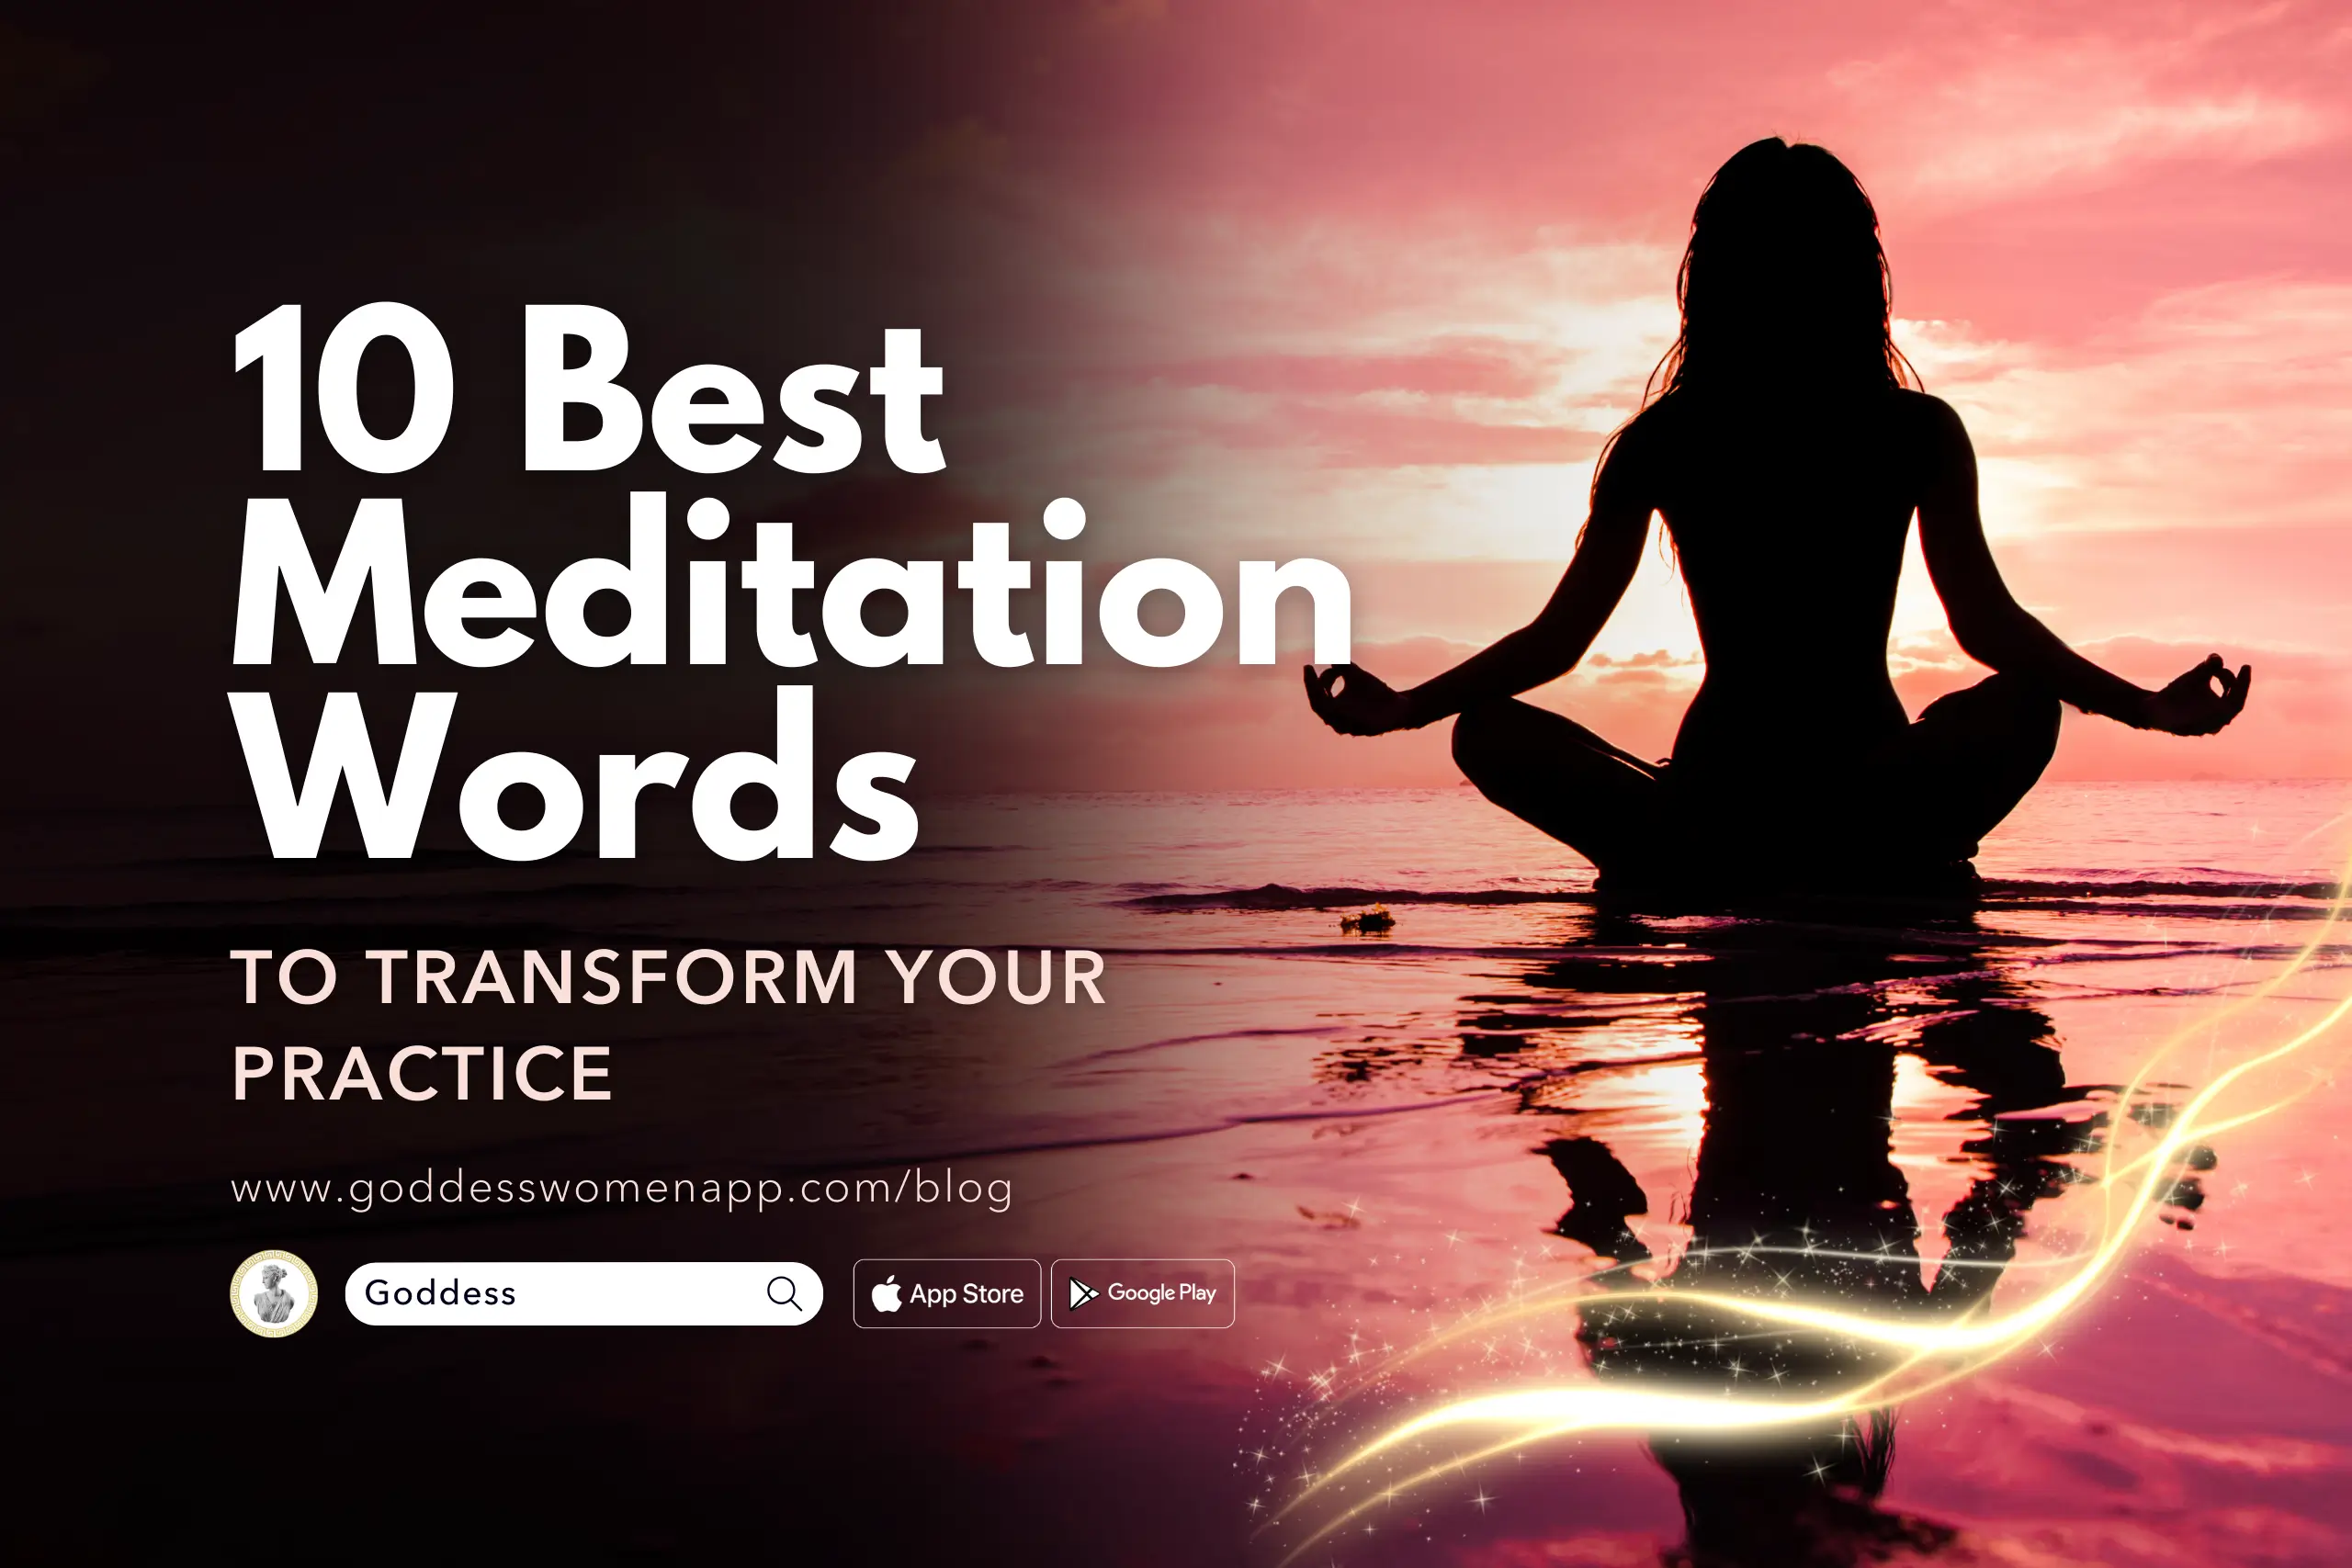 10 Best Meditation Words to Transform Your Practice